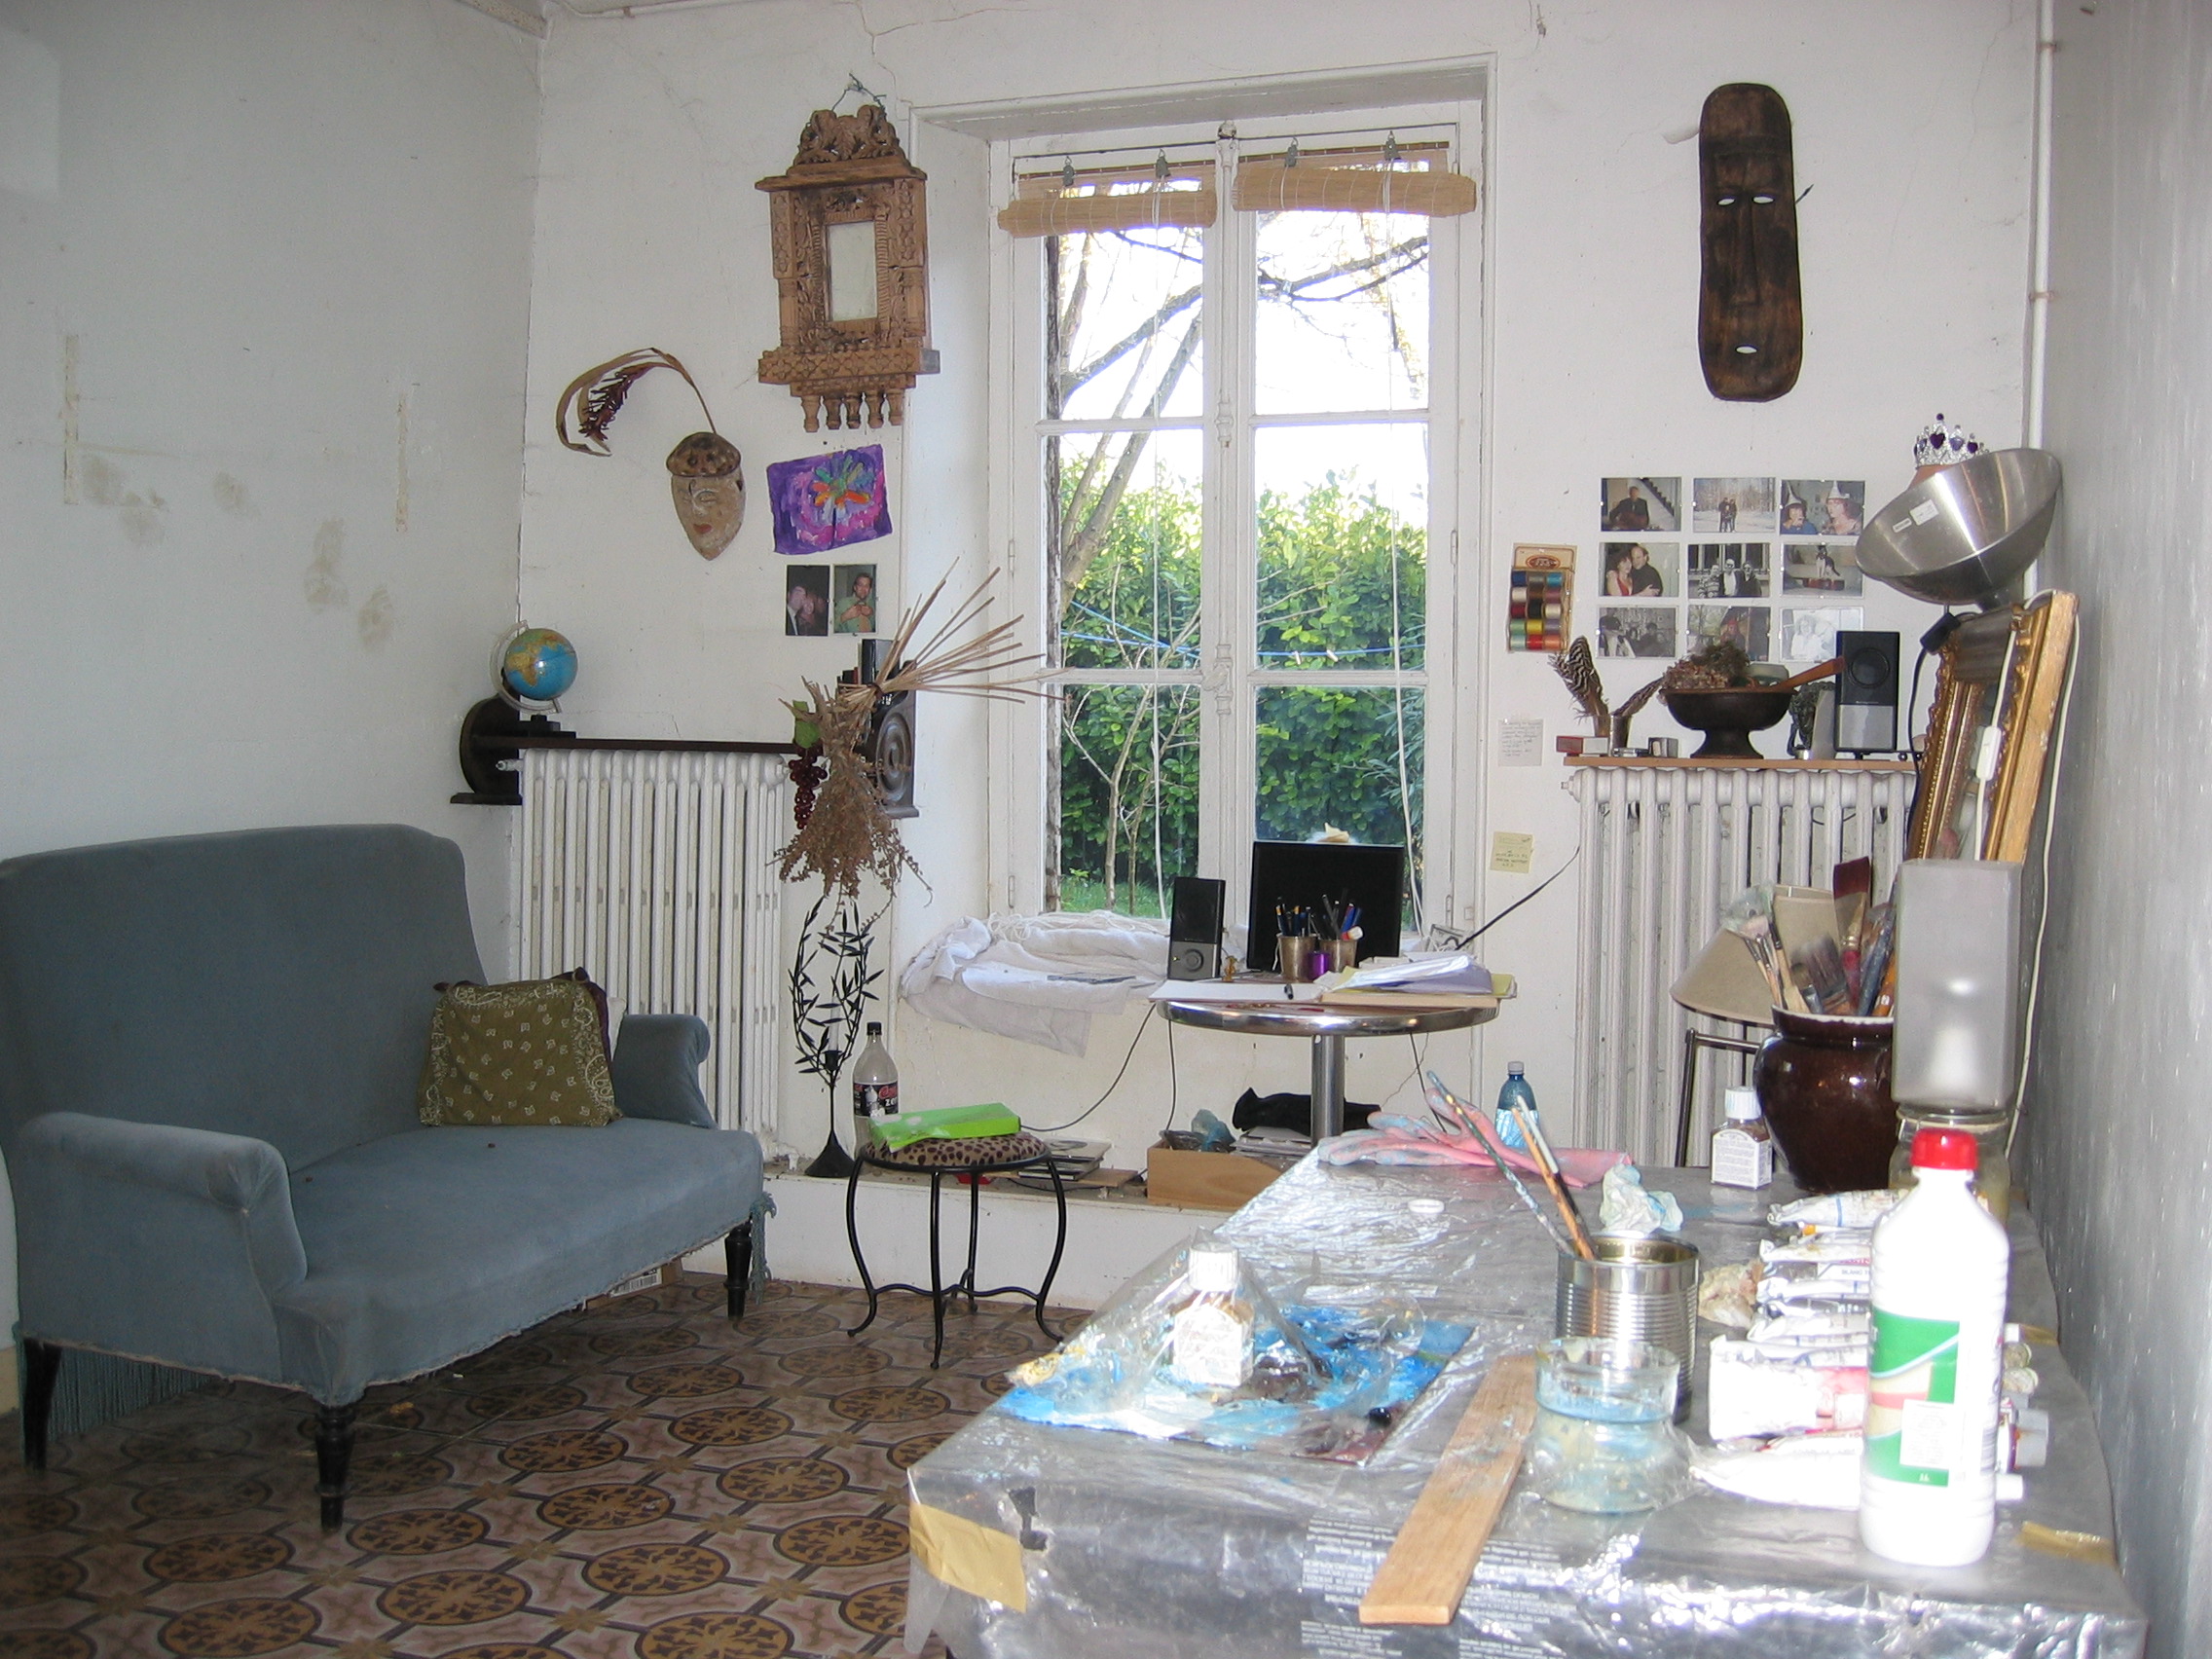 The studio in Septeuil. It was wonderful living in the Normandy landscape.